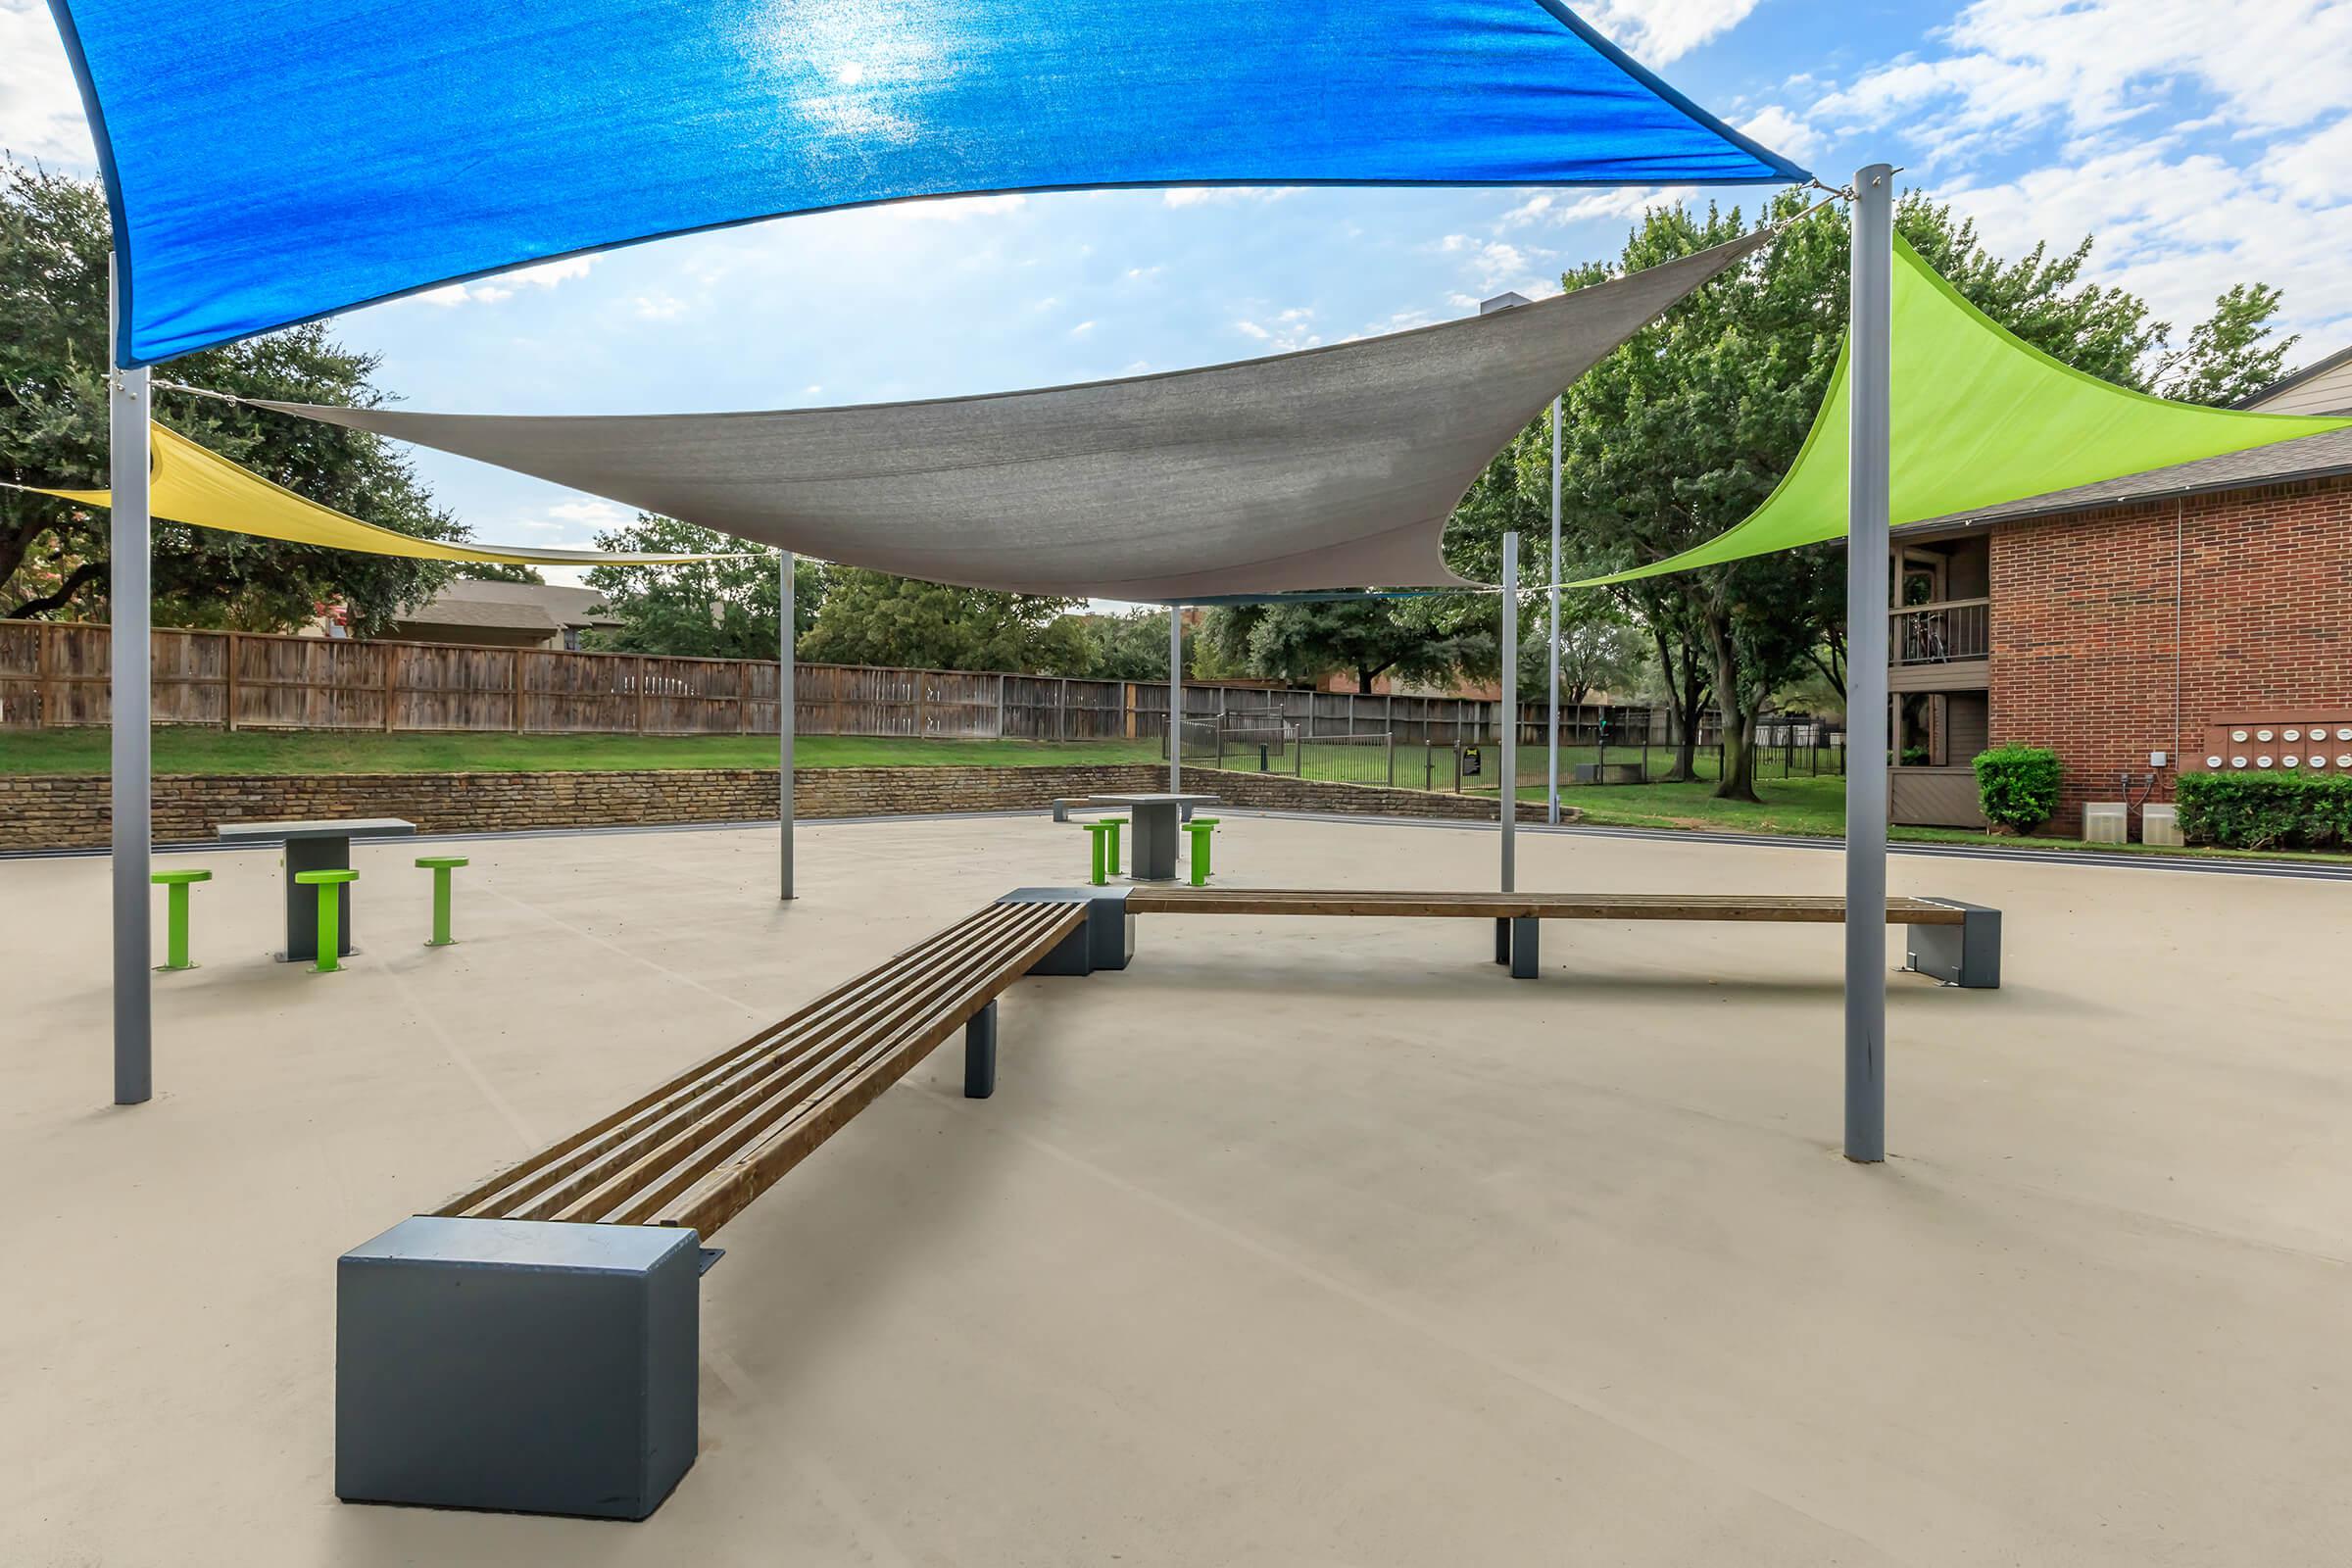 Oak Chase community area with wooden benches